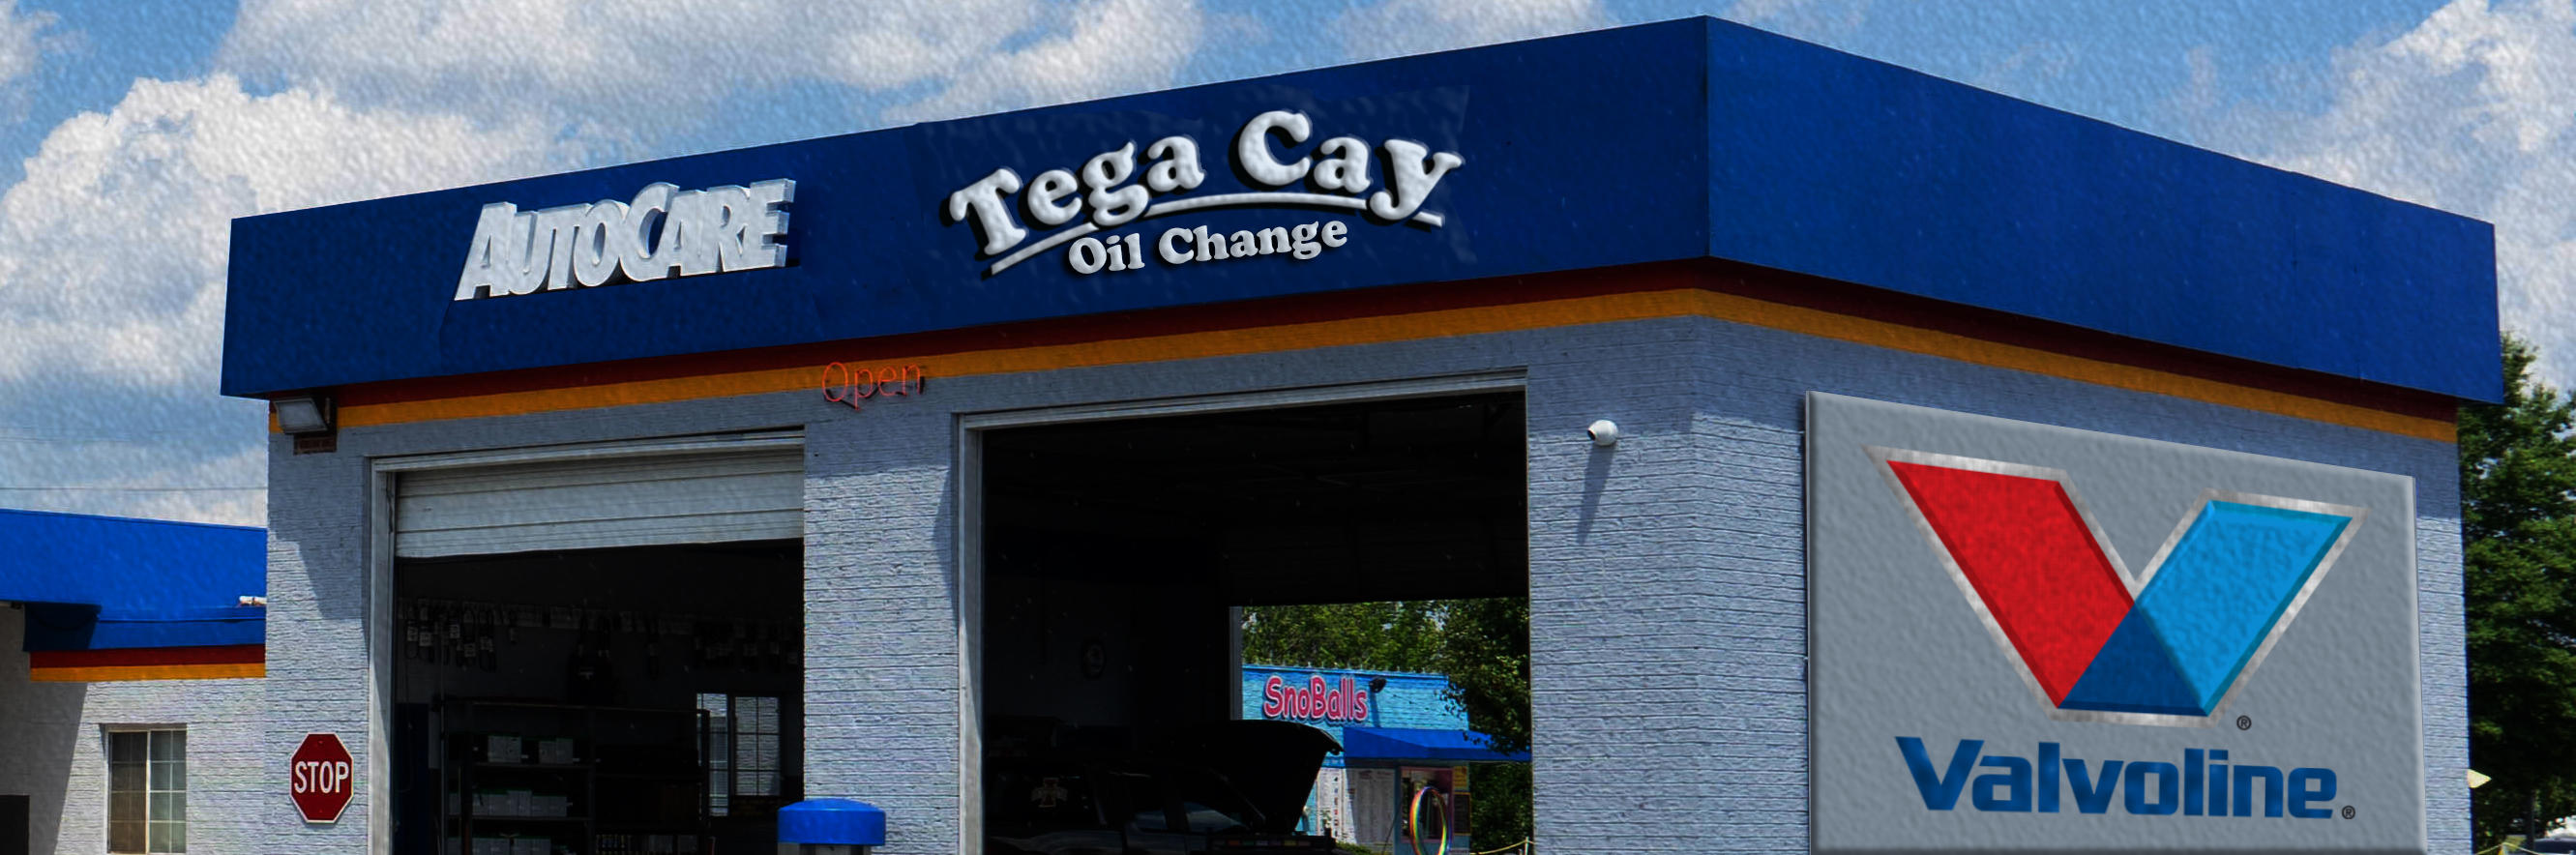 Fort Mill location: Capture the essence of Tega Cay Oil Change, your trusted auto service shop in Fort Mill, SC. This picture showcases our commitment to excellence as we proudly pour Valvoline oil during our top-notch auto repair services. From brake replacement to brake repair and AC repair, our skilled technicians deliver exceptional service and quality craftsmanship. Trust Tega Cay Oil Change for all your automotive needs.